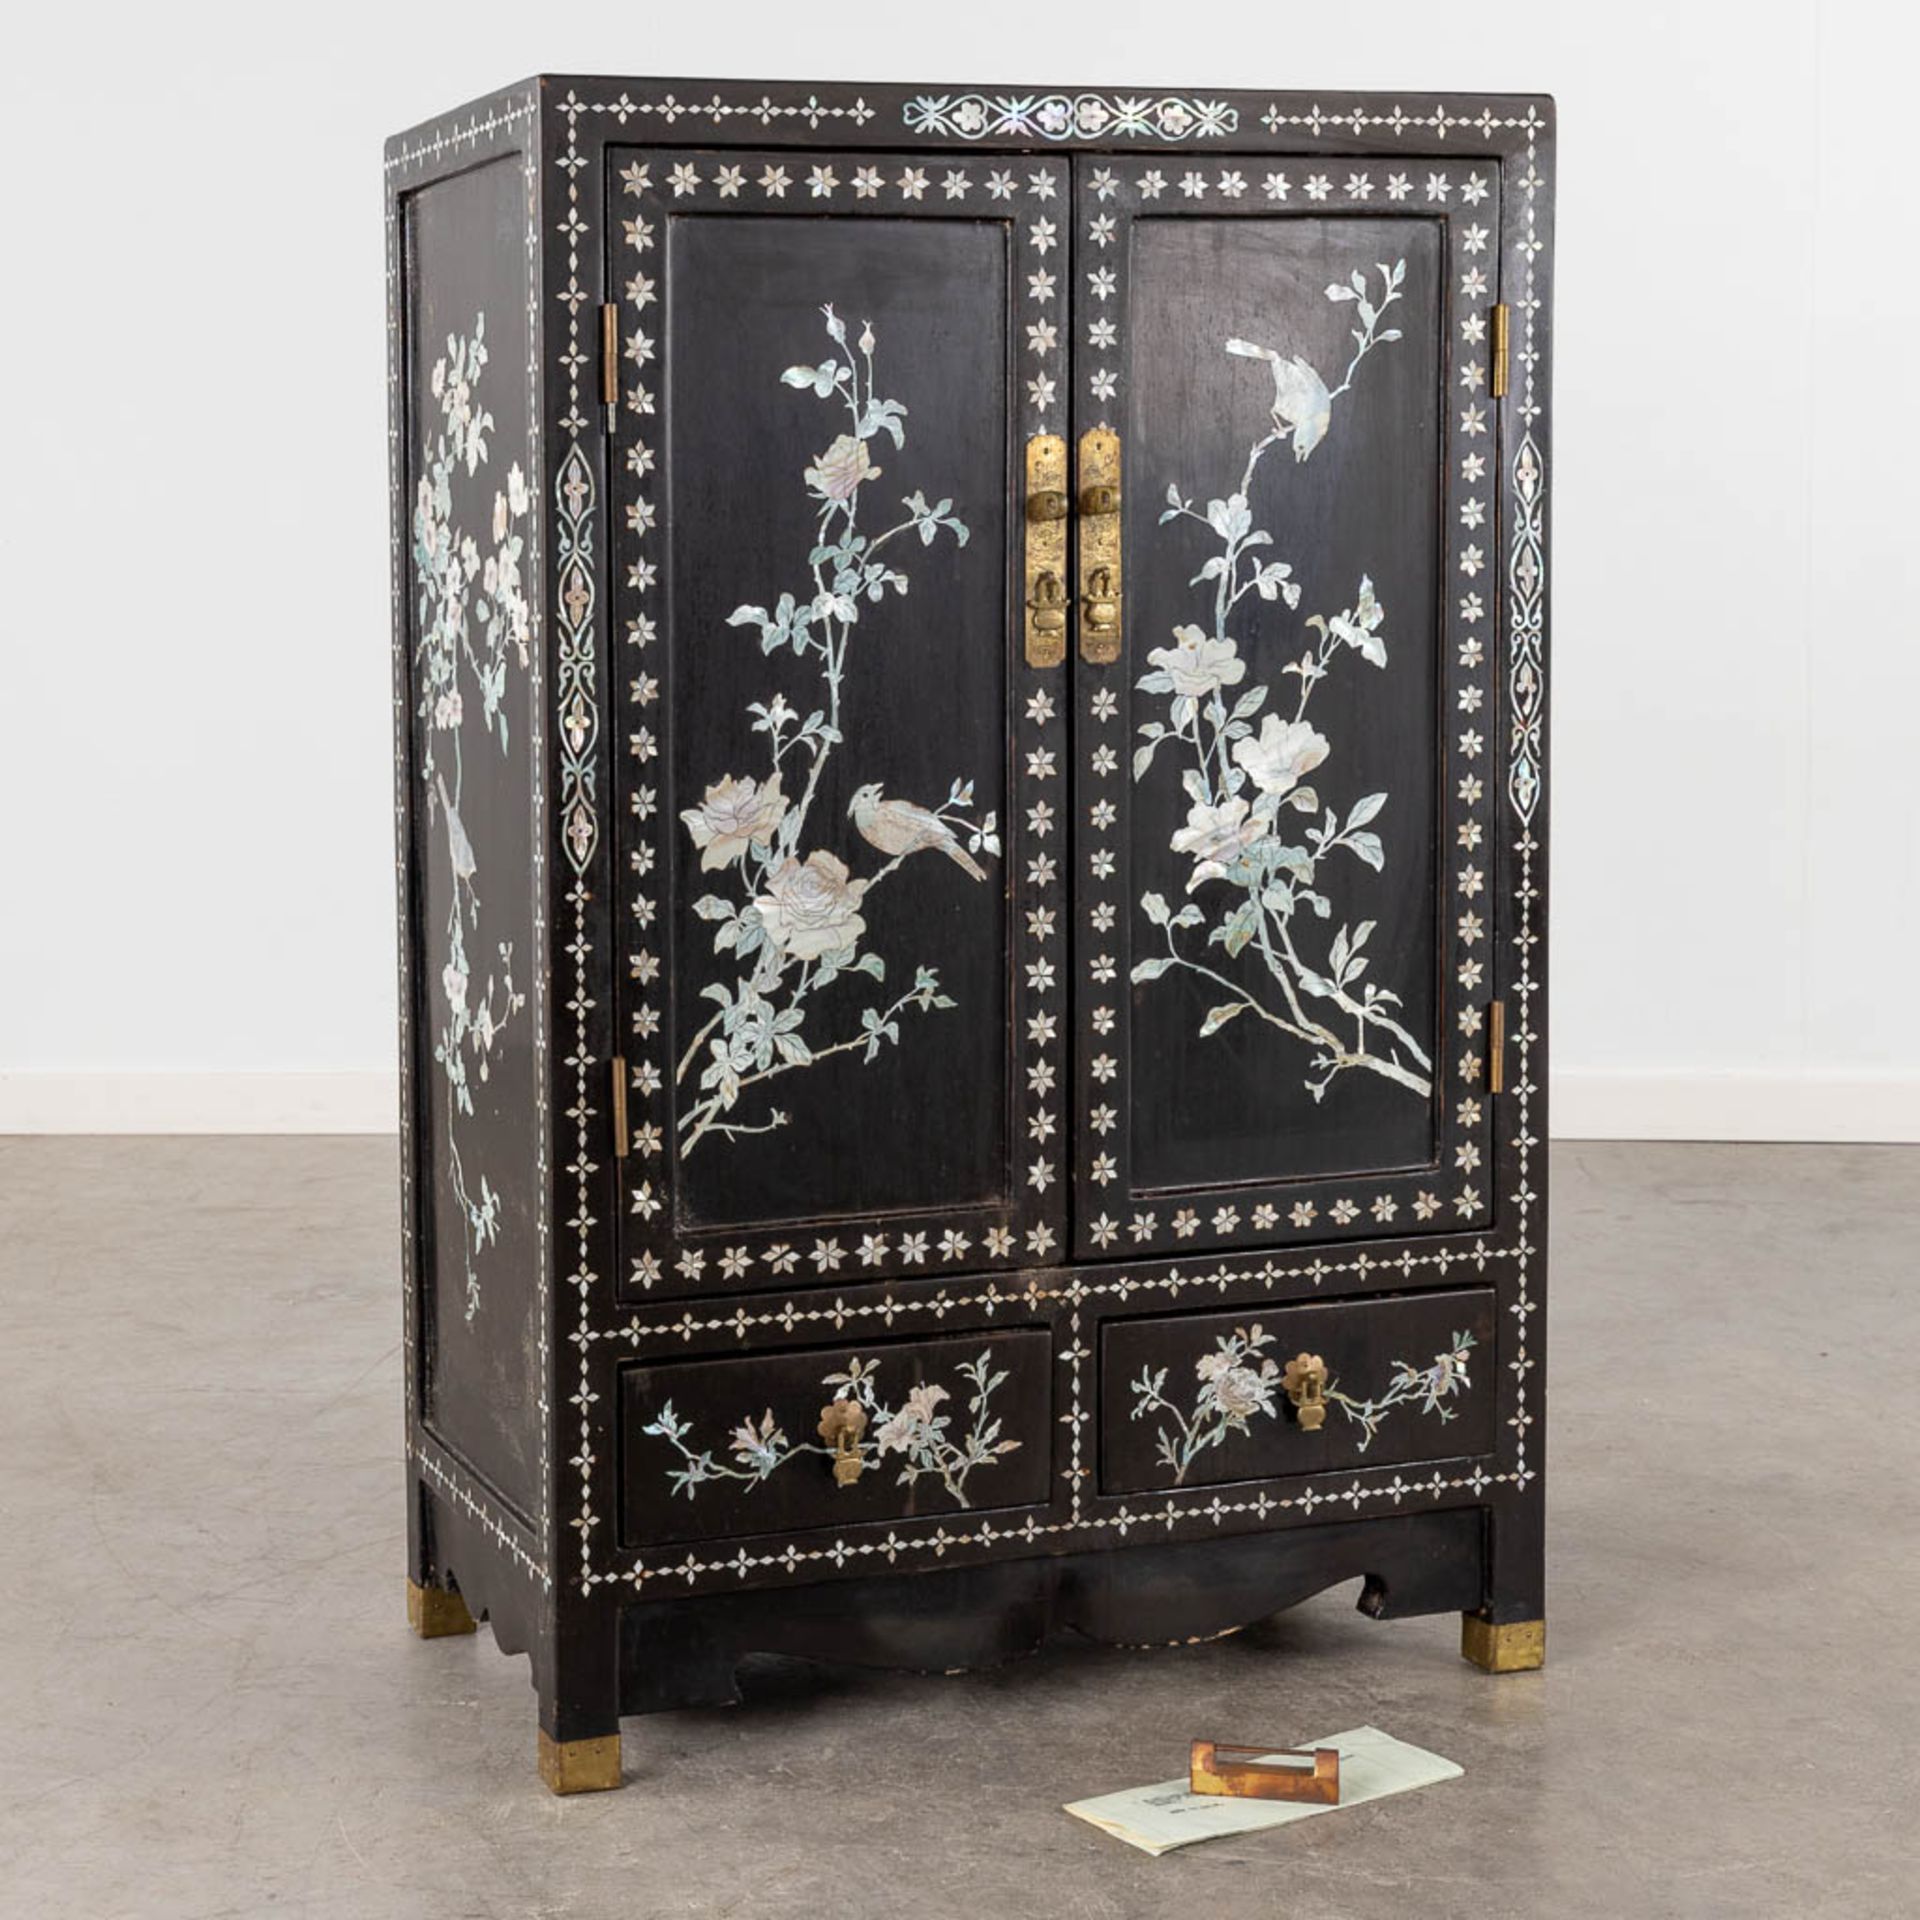 A Chinoiserie cabinet, mother of pearl inlay in ebonised wood. 20th C. (D:31 x W:61 x H:92 cm)